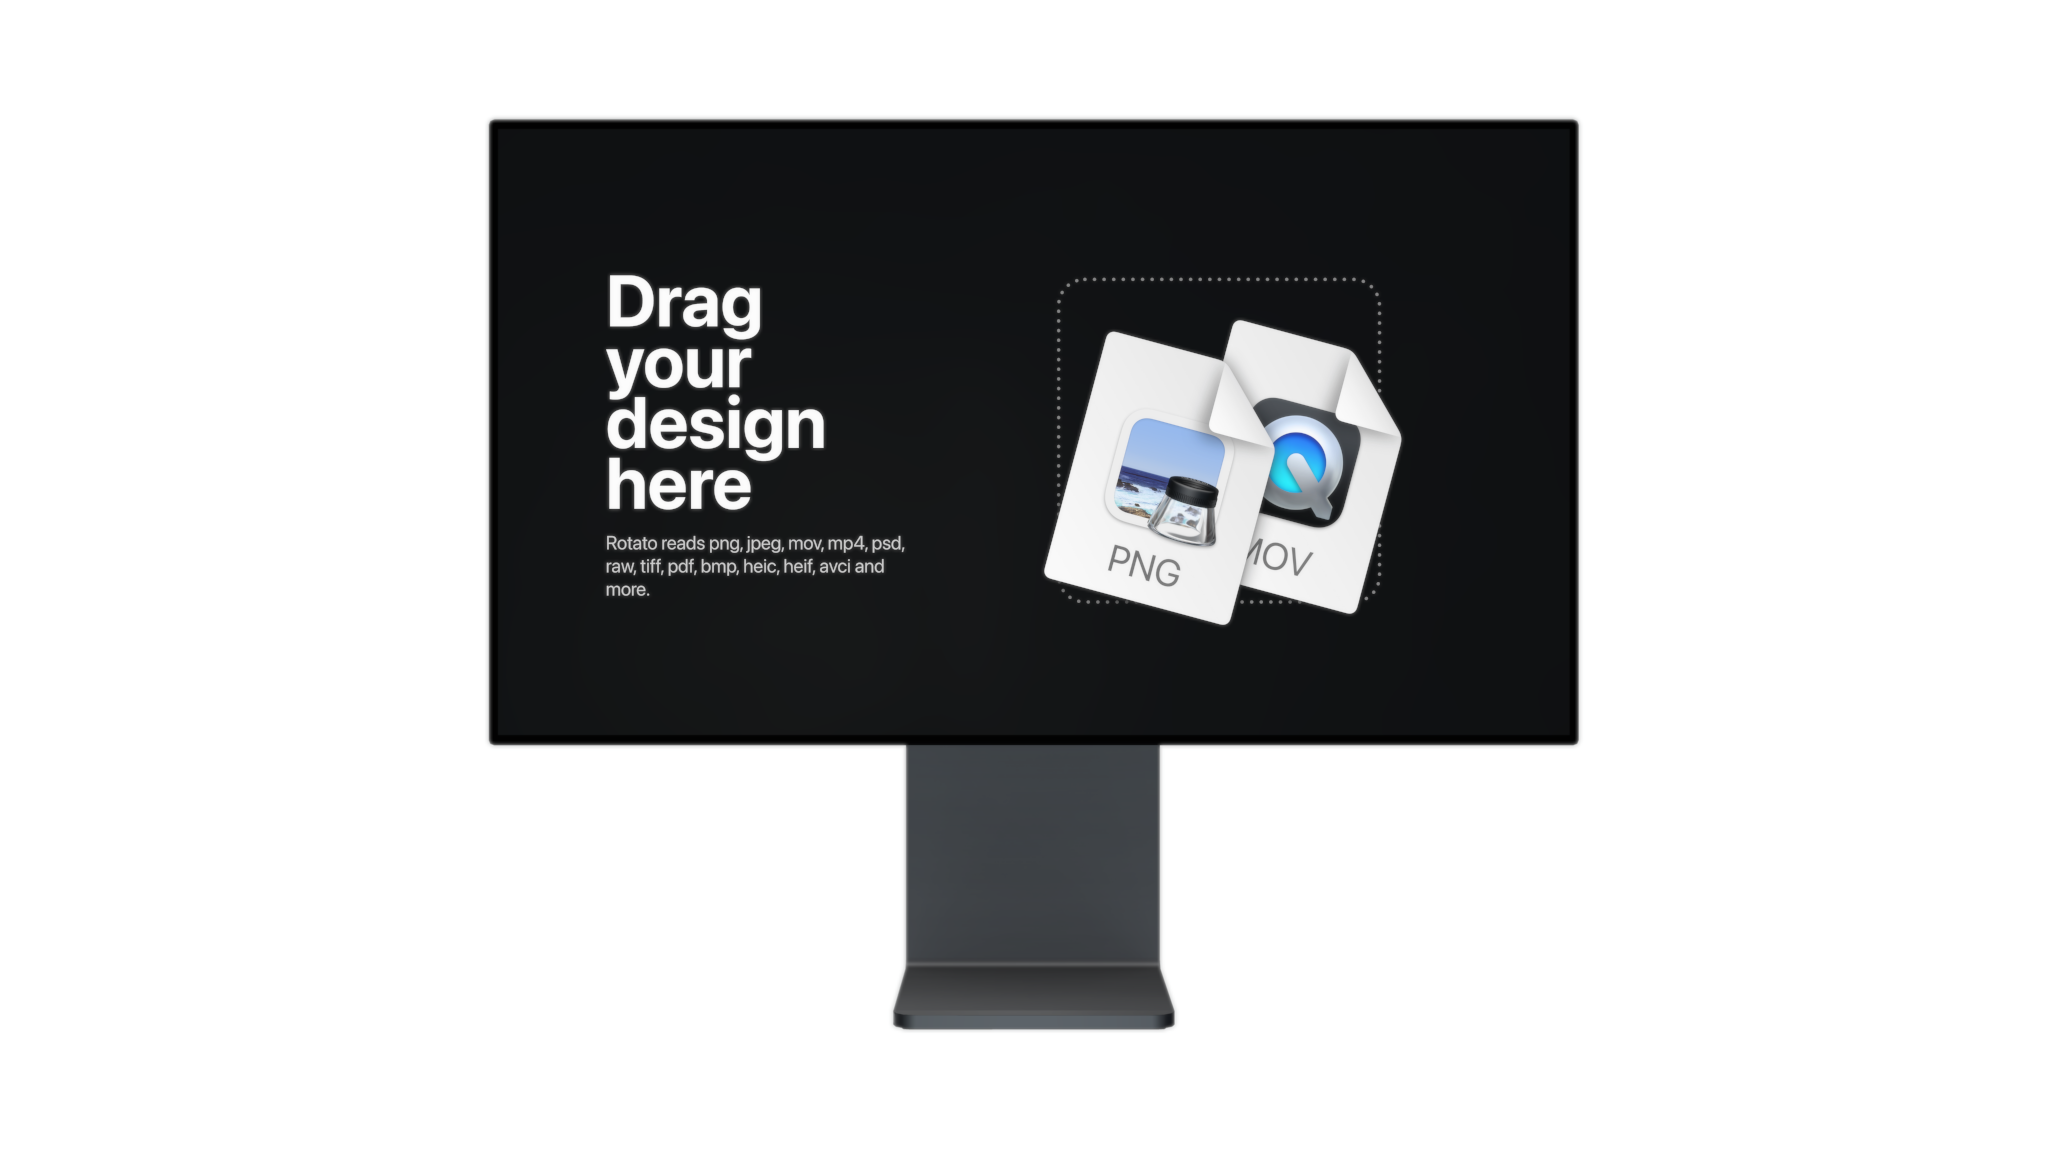 Display Monitor from front